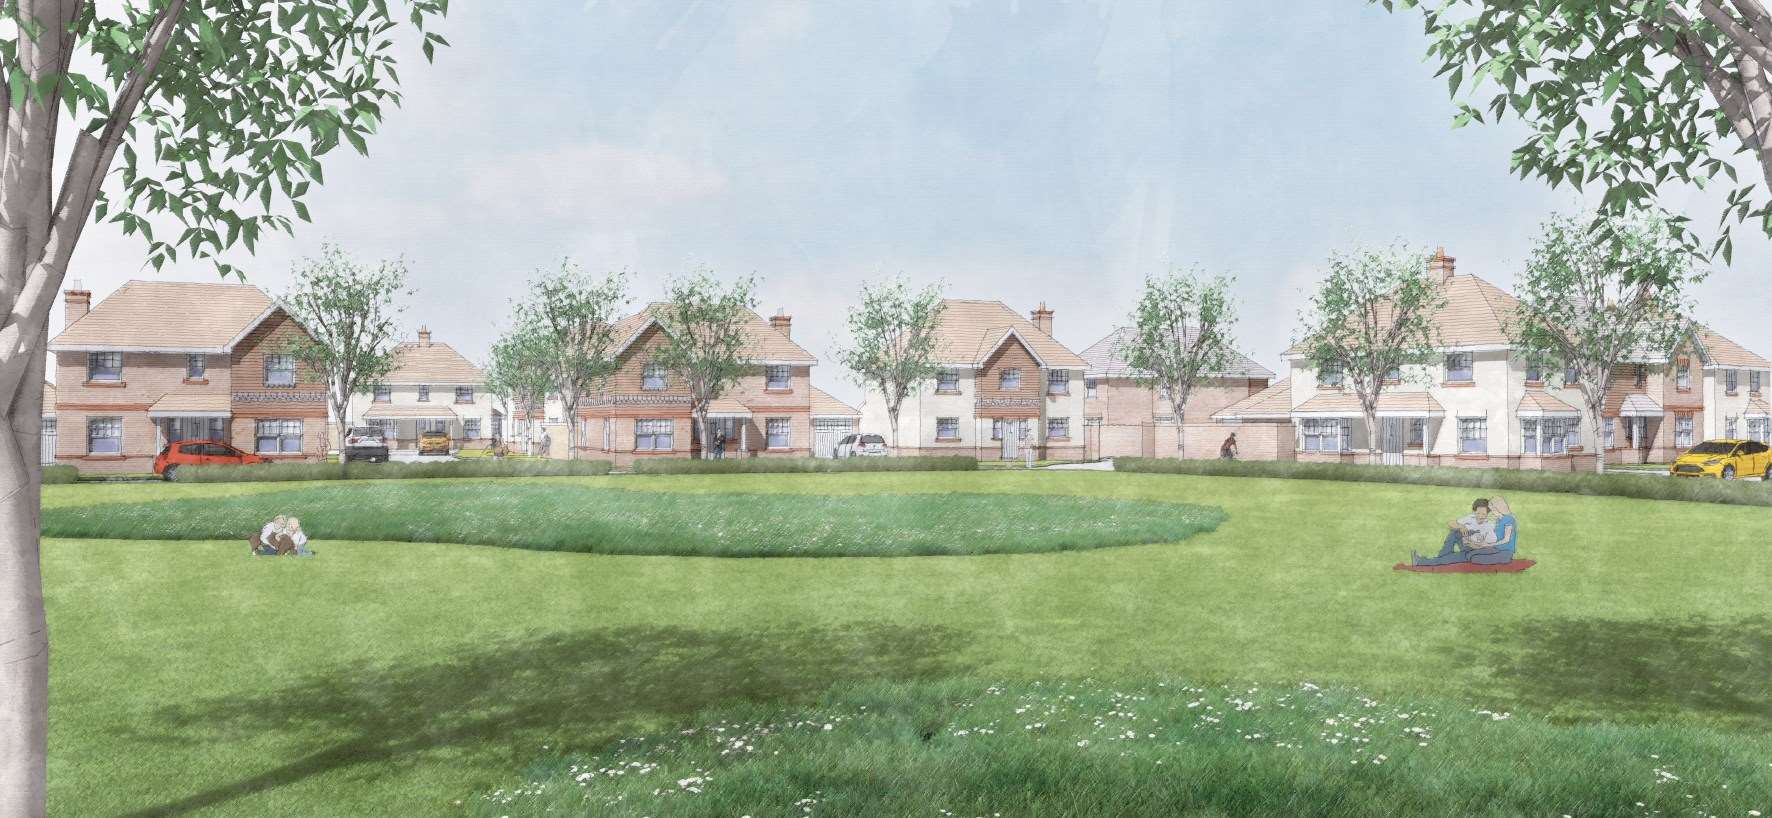 The Oakley Park development in Edenbridge is due to be built by Bellway. Picture: DHA Architecture